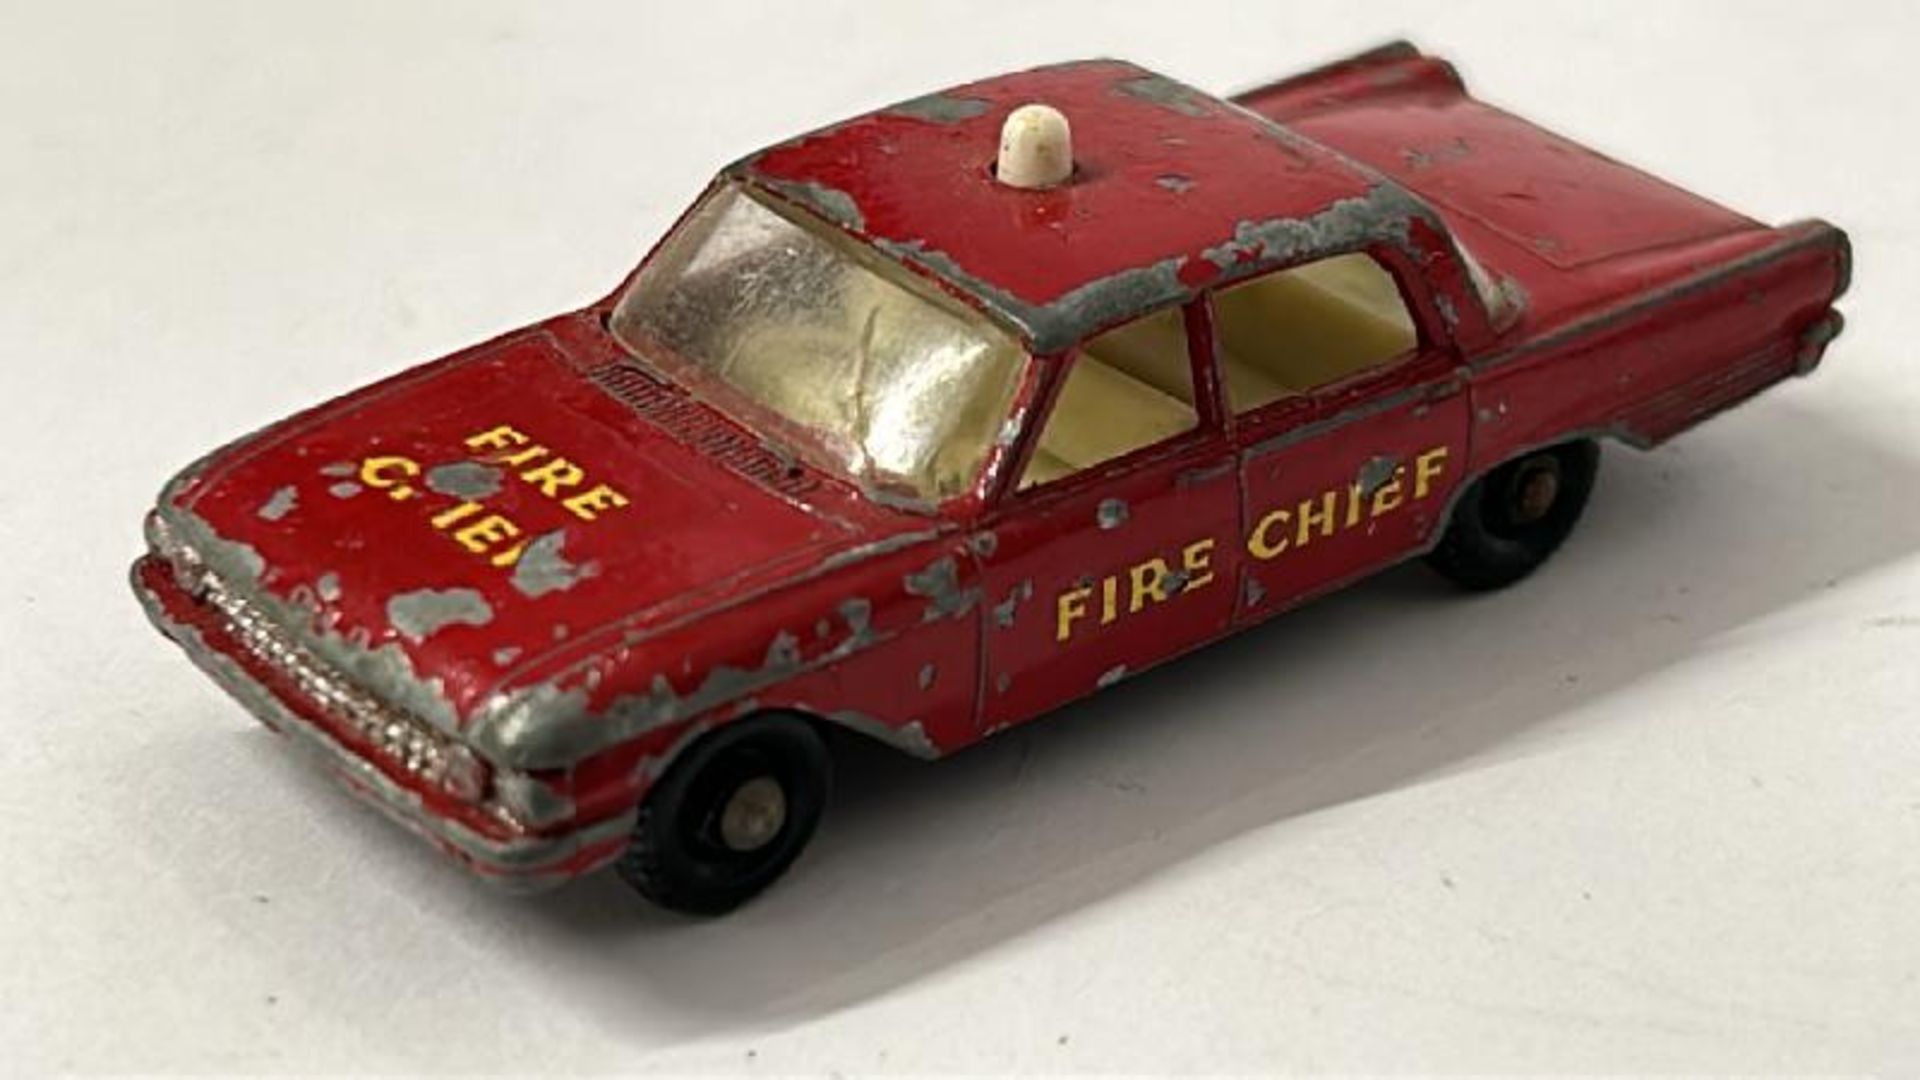 Unboxed Matchbox group including Volkswagen 1600TL no.67, Volkswagen Beatle no.25 and Ford Fire - Image 23 of 28